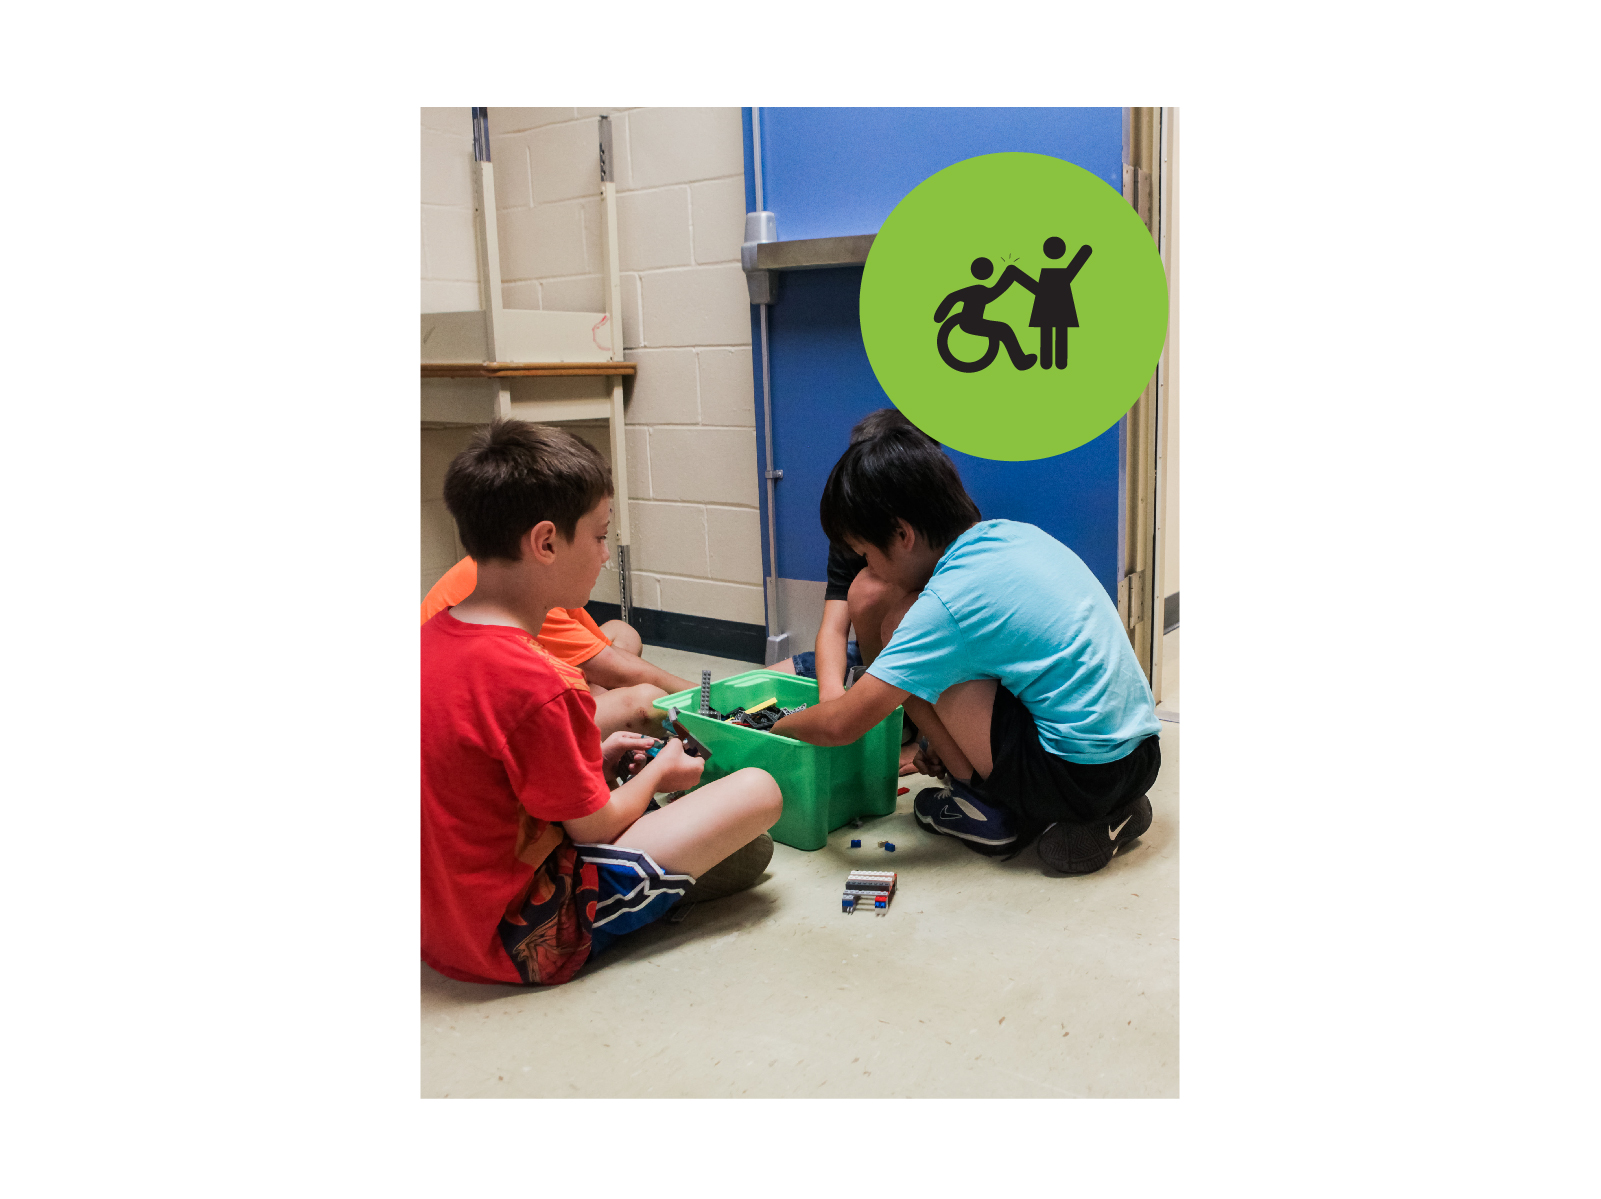 3 boys sitting around a box of legos. Green circle icon with graphic of person in a wheelchair highfiving a person standing up.